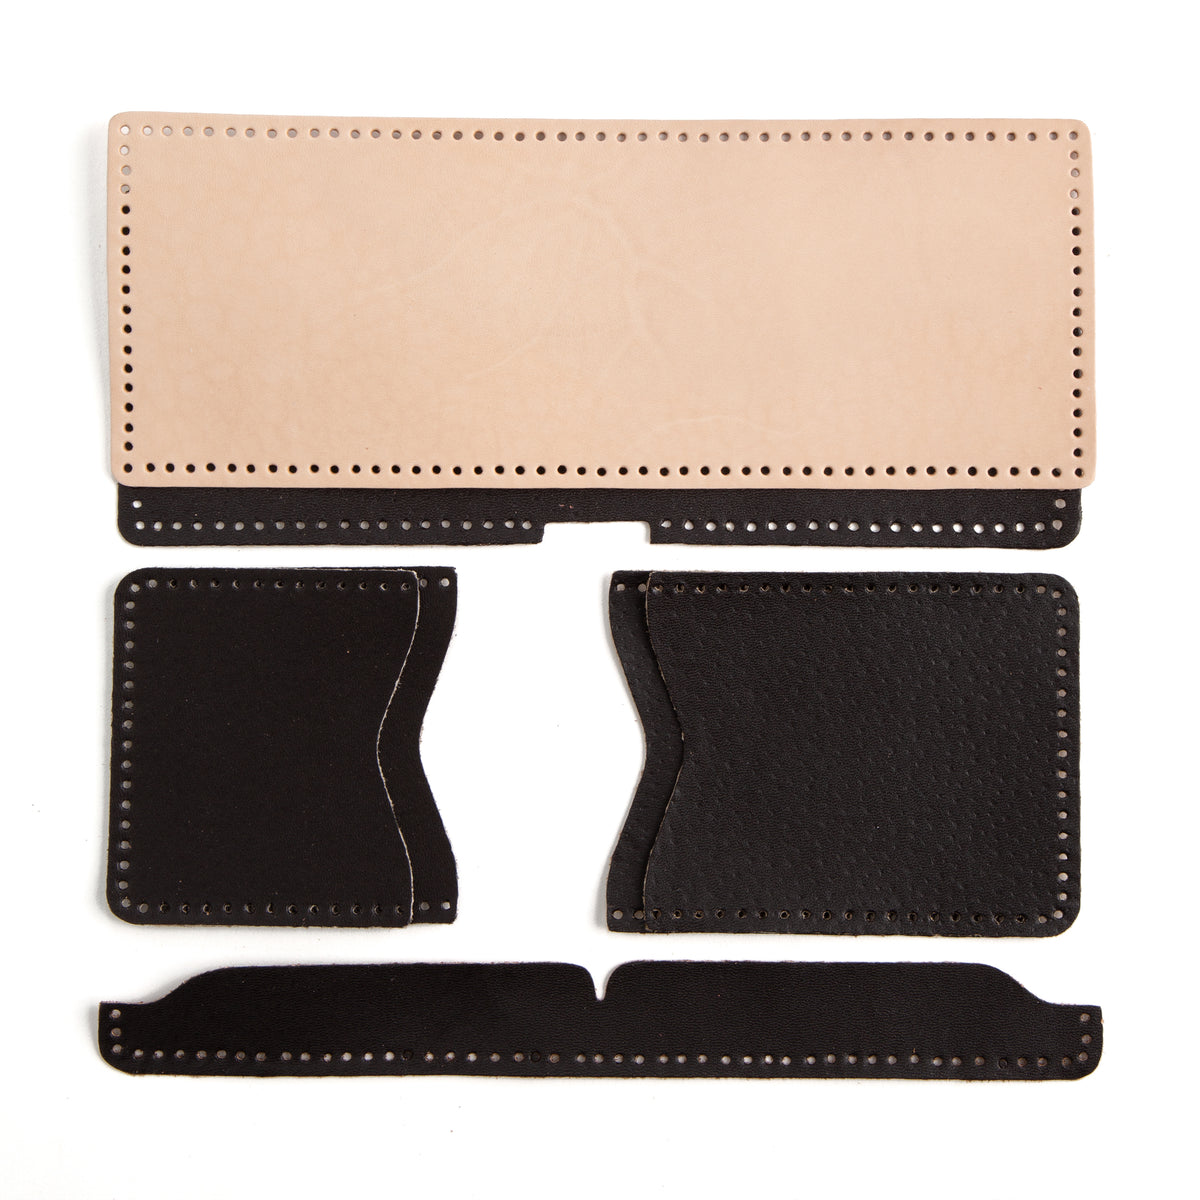 Top Notch Billfold Leather Pack of 10 from Tandy Leather